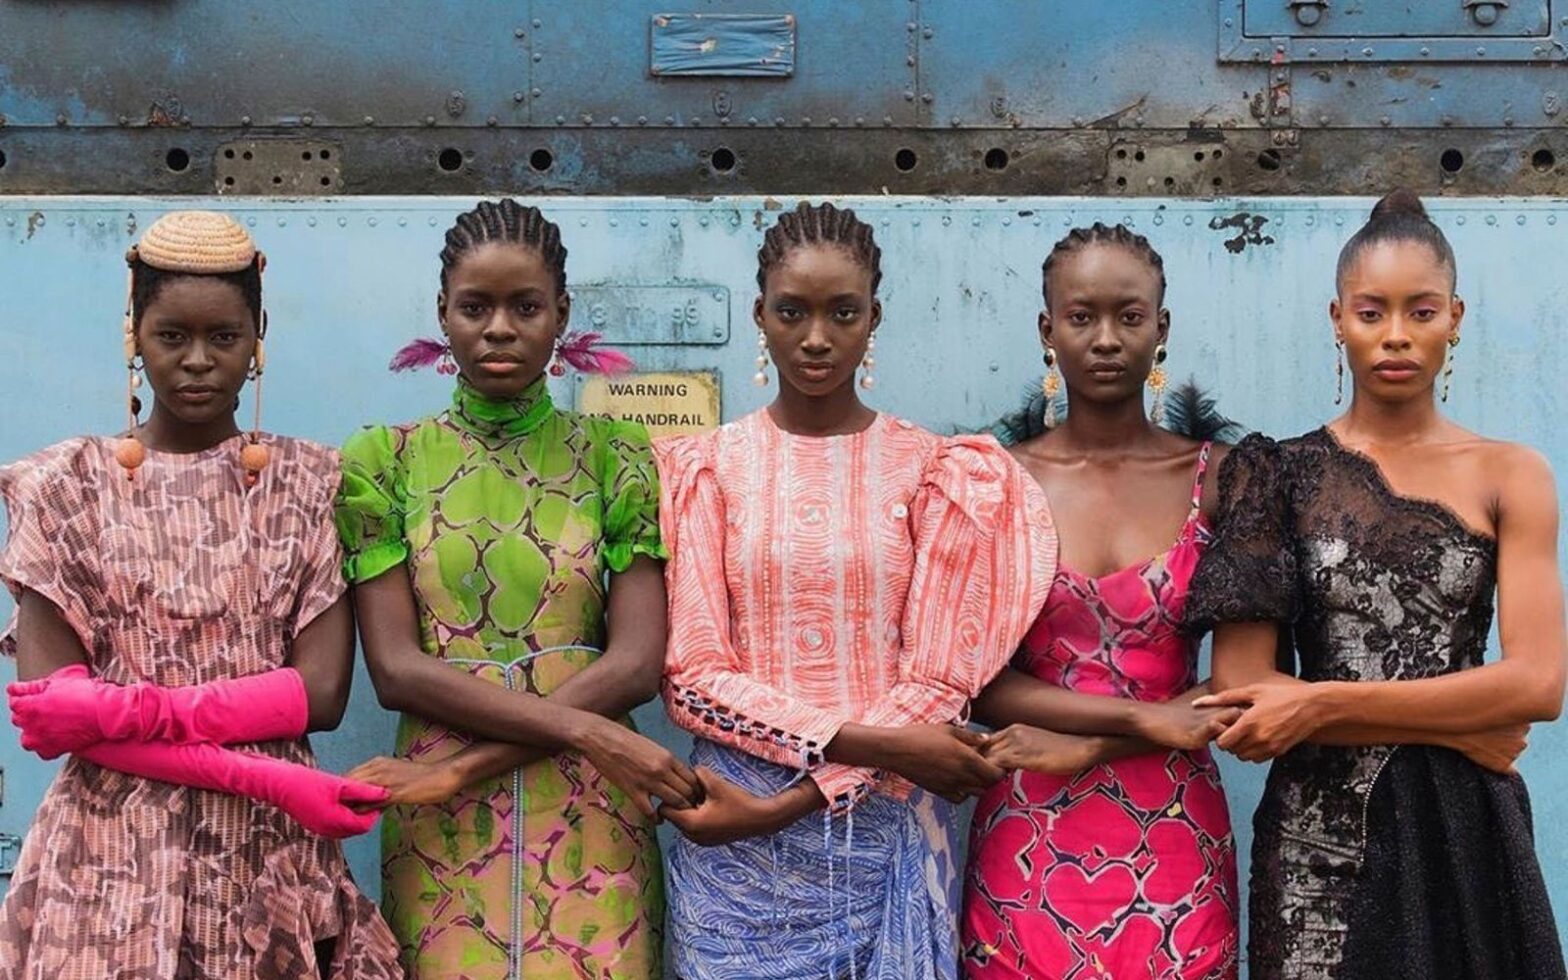 Models holding hands, Lagos, Nigeria, 2019 - African Fashion Exhibit at Brooklyn Museum